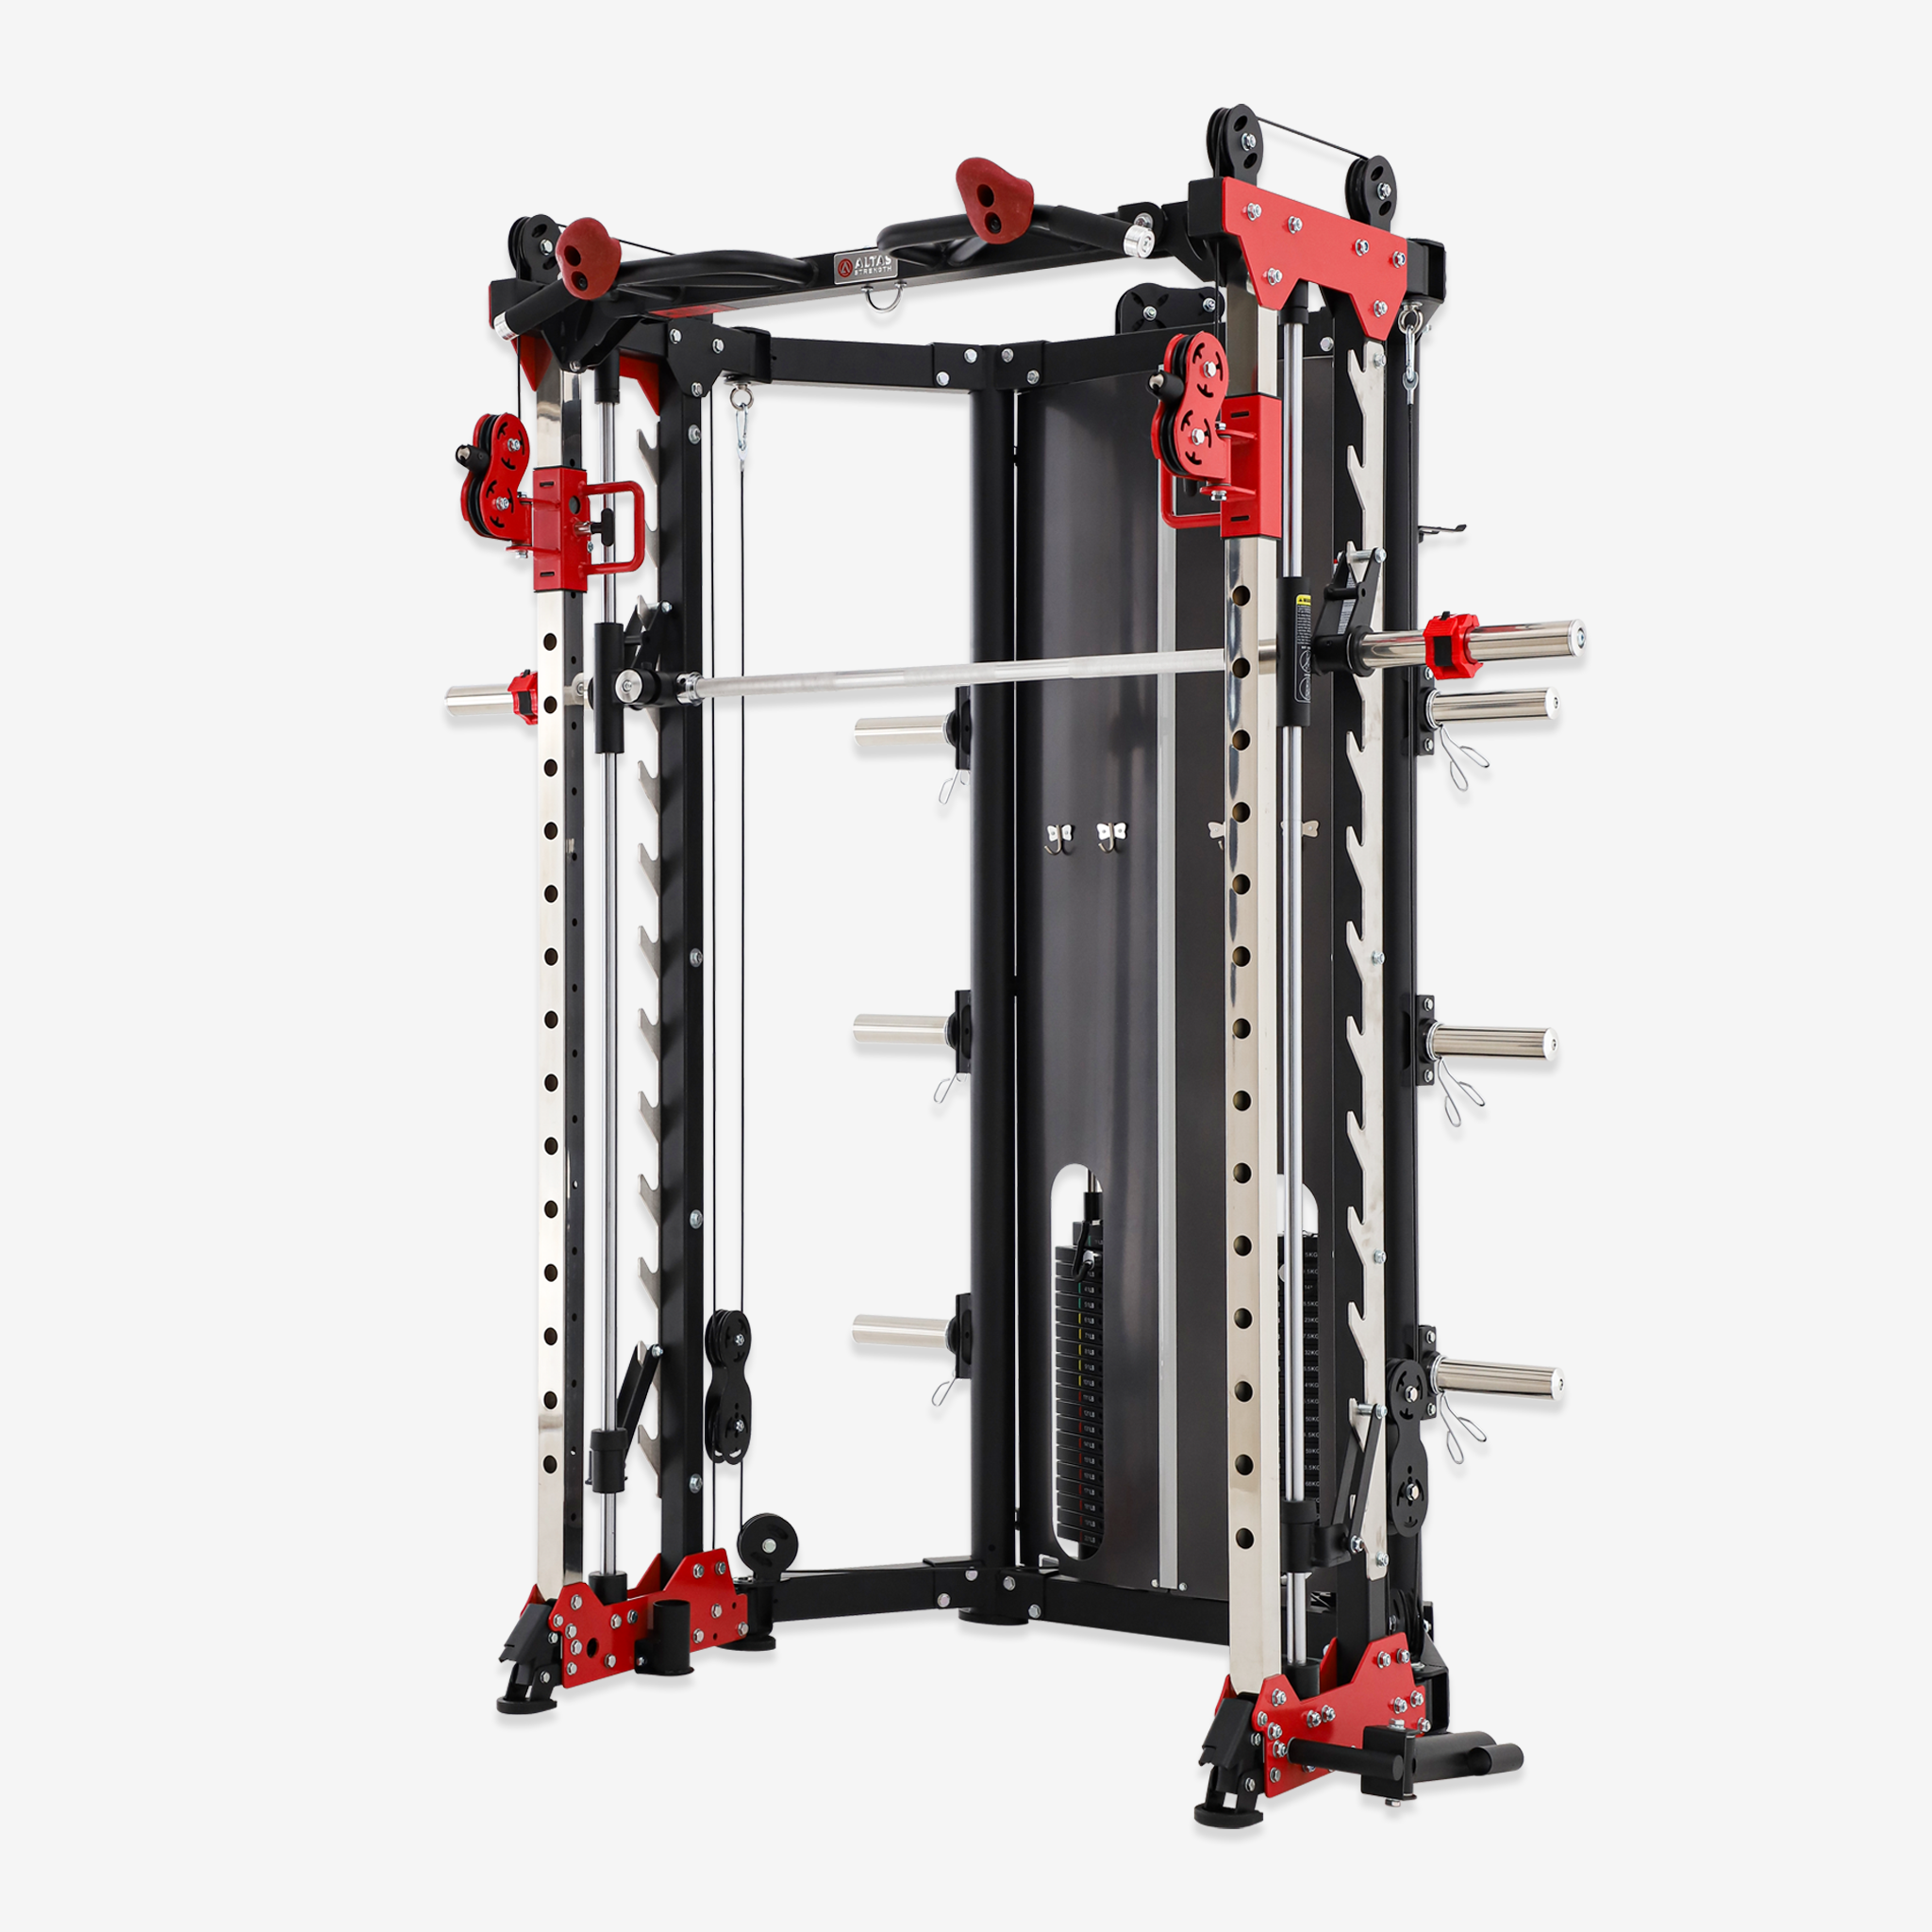 Anself Multi-Functional Home Gym Fitness Machine with Weight Plates  Training Equipment Exercise Workout Strength Machine 59 x 39 x 80 Inches (L  x W x